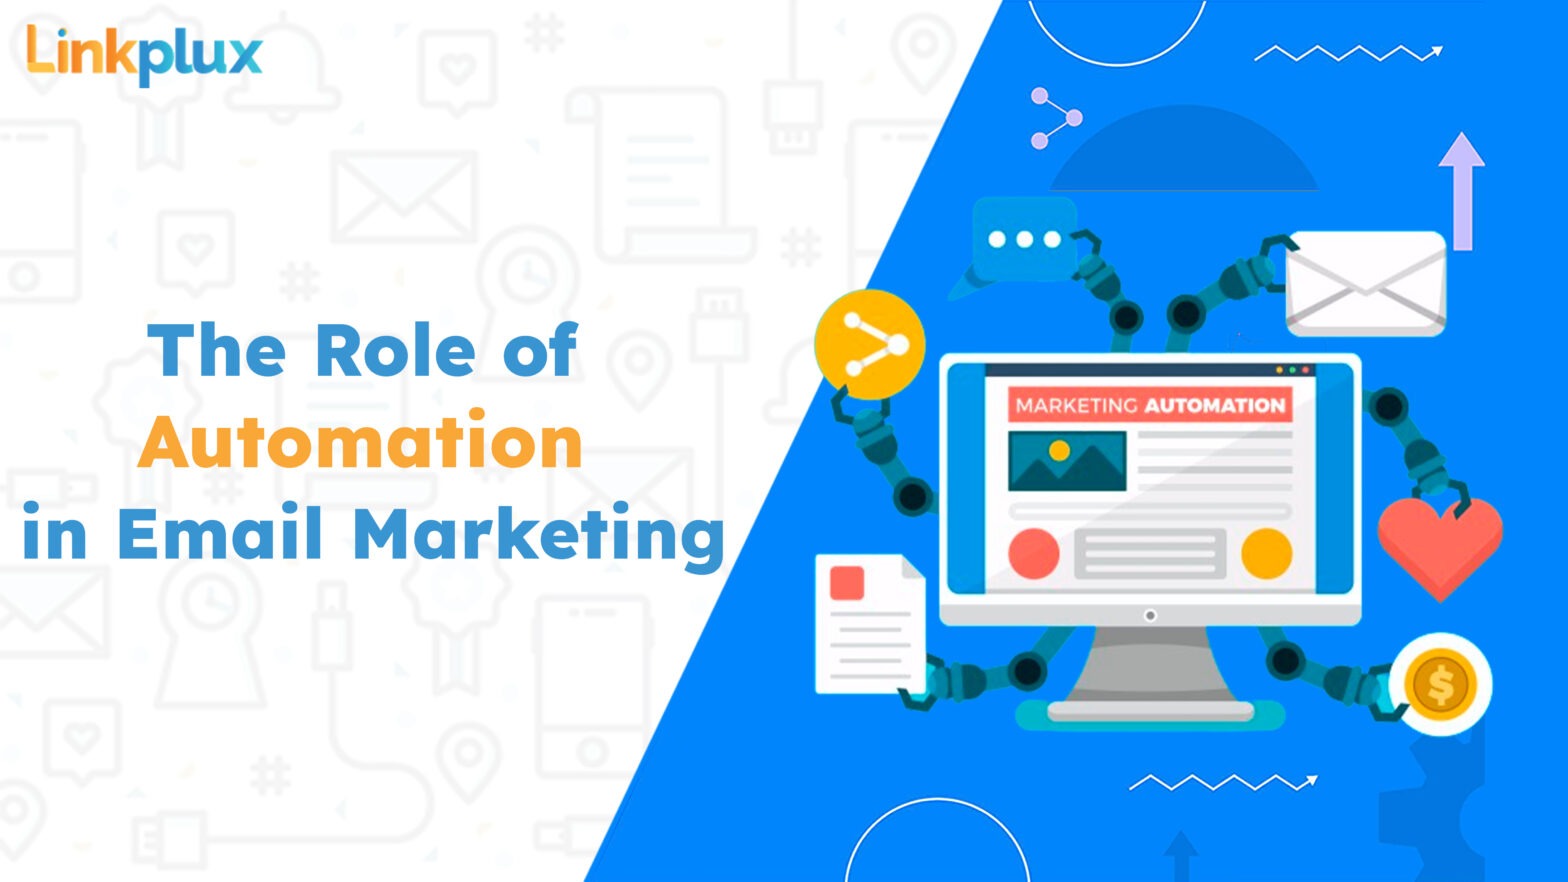 The role of automation in email marketing